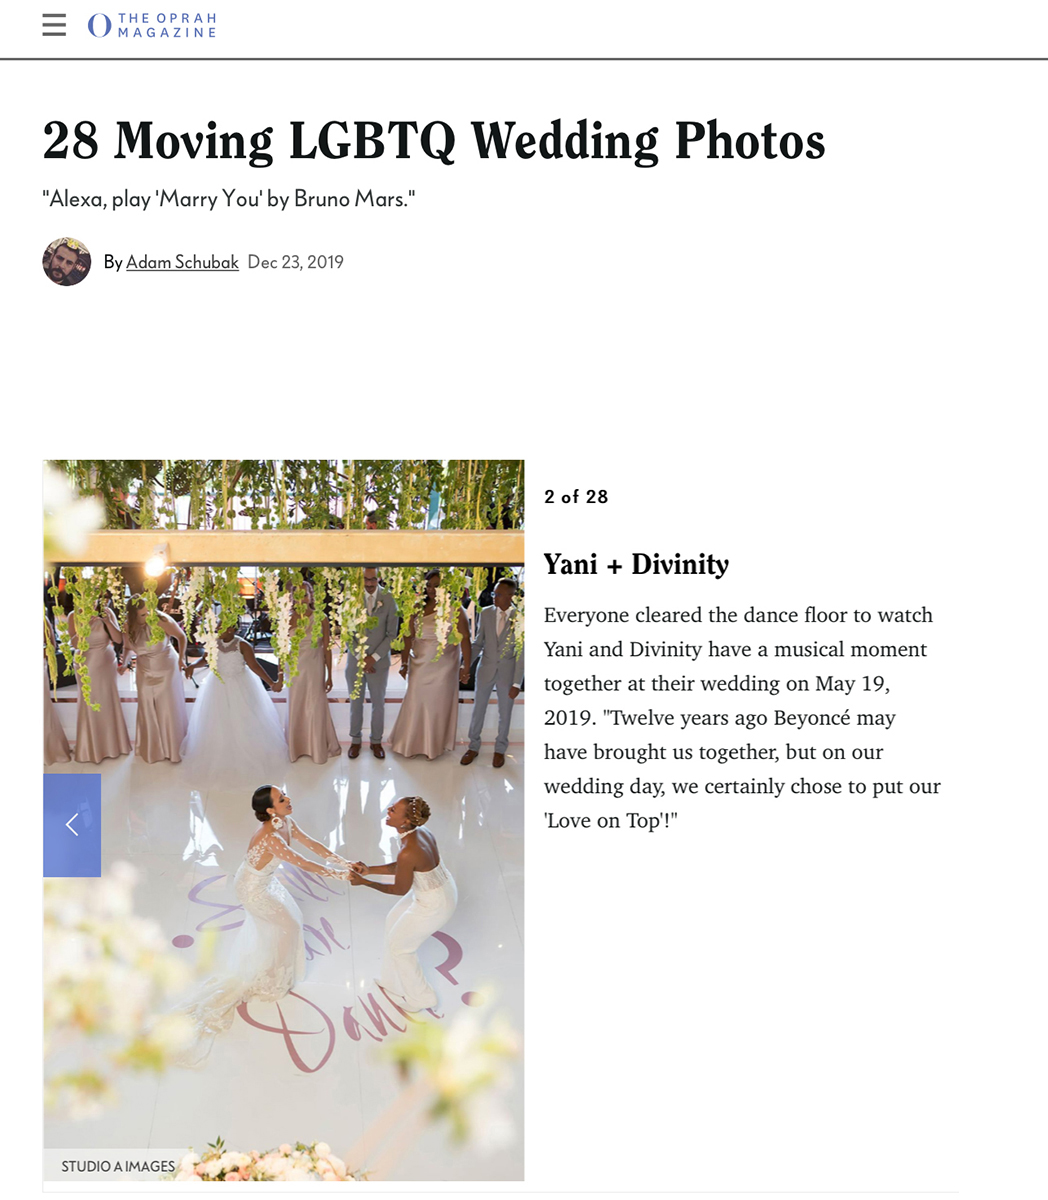 Oprah Magazine - December 20198 photos were included in their feature on LGBTQ weddingssee all of the photos here